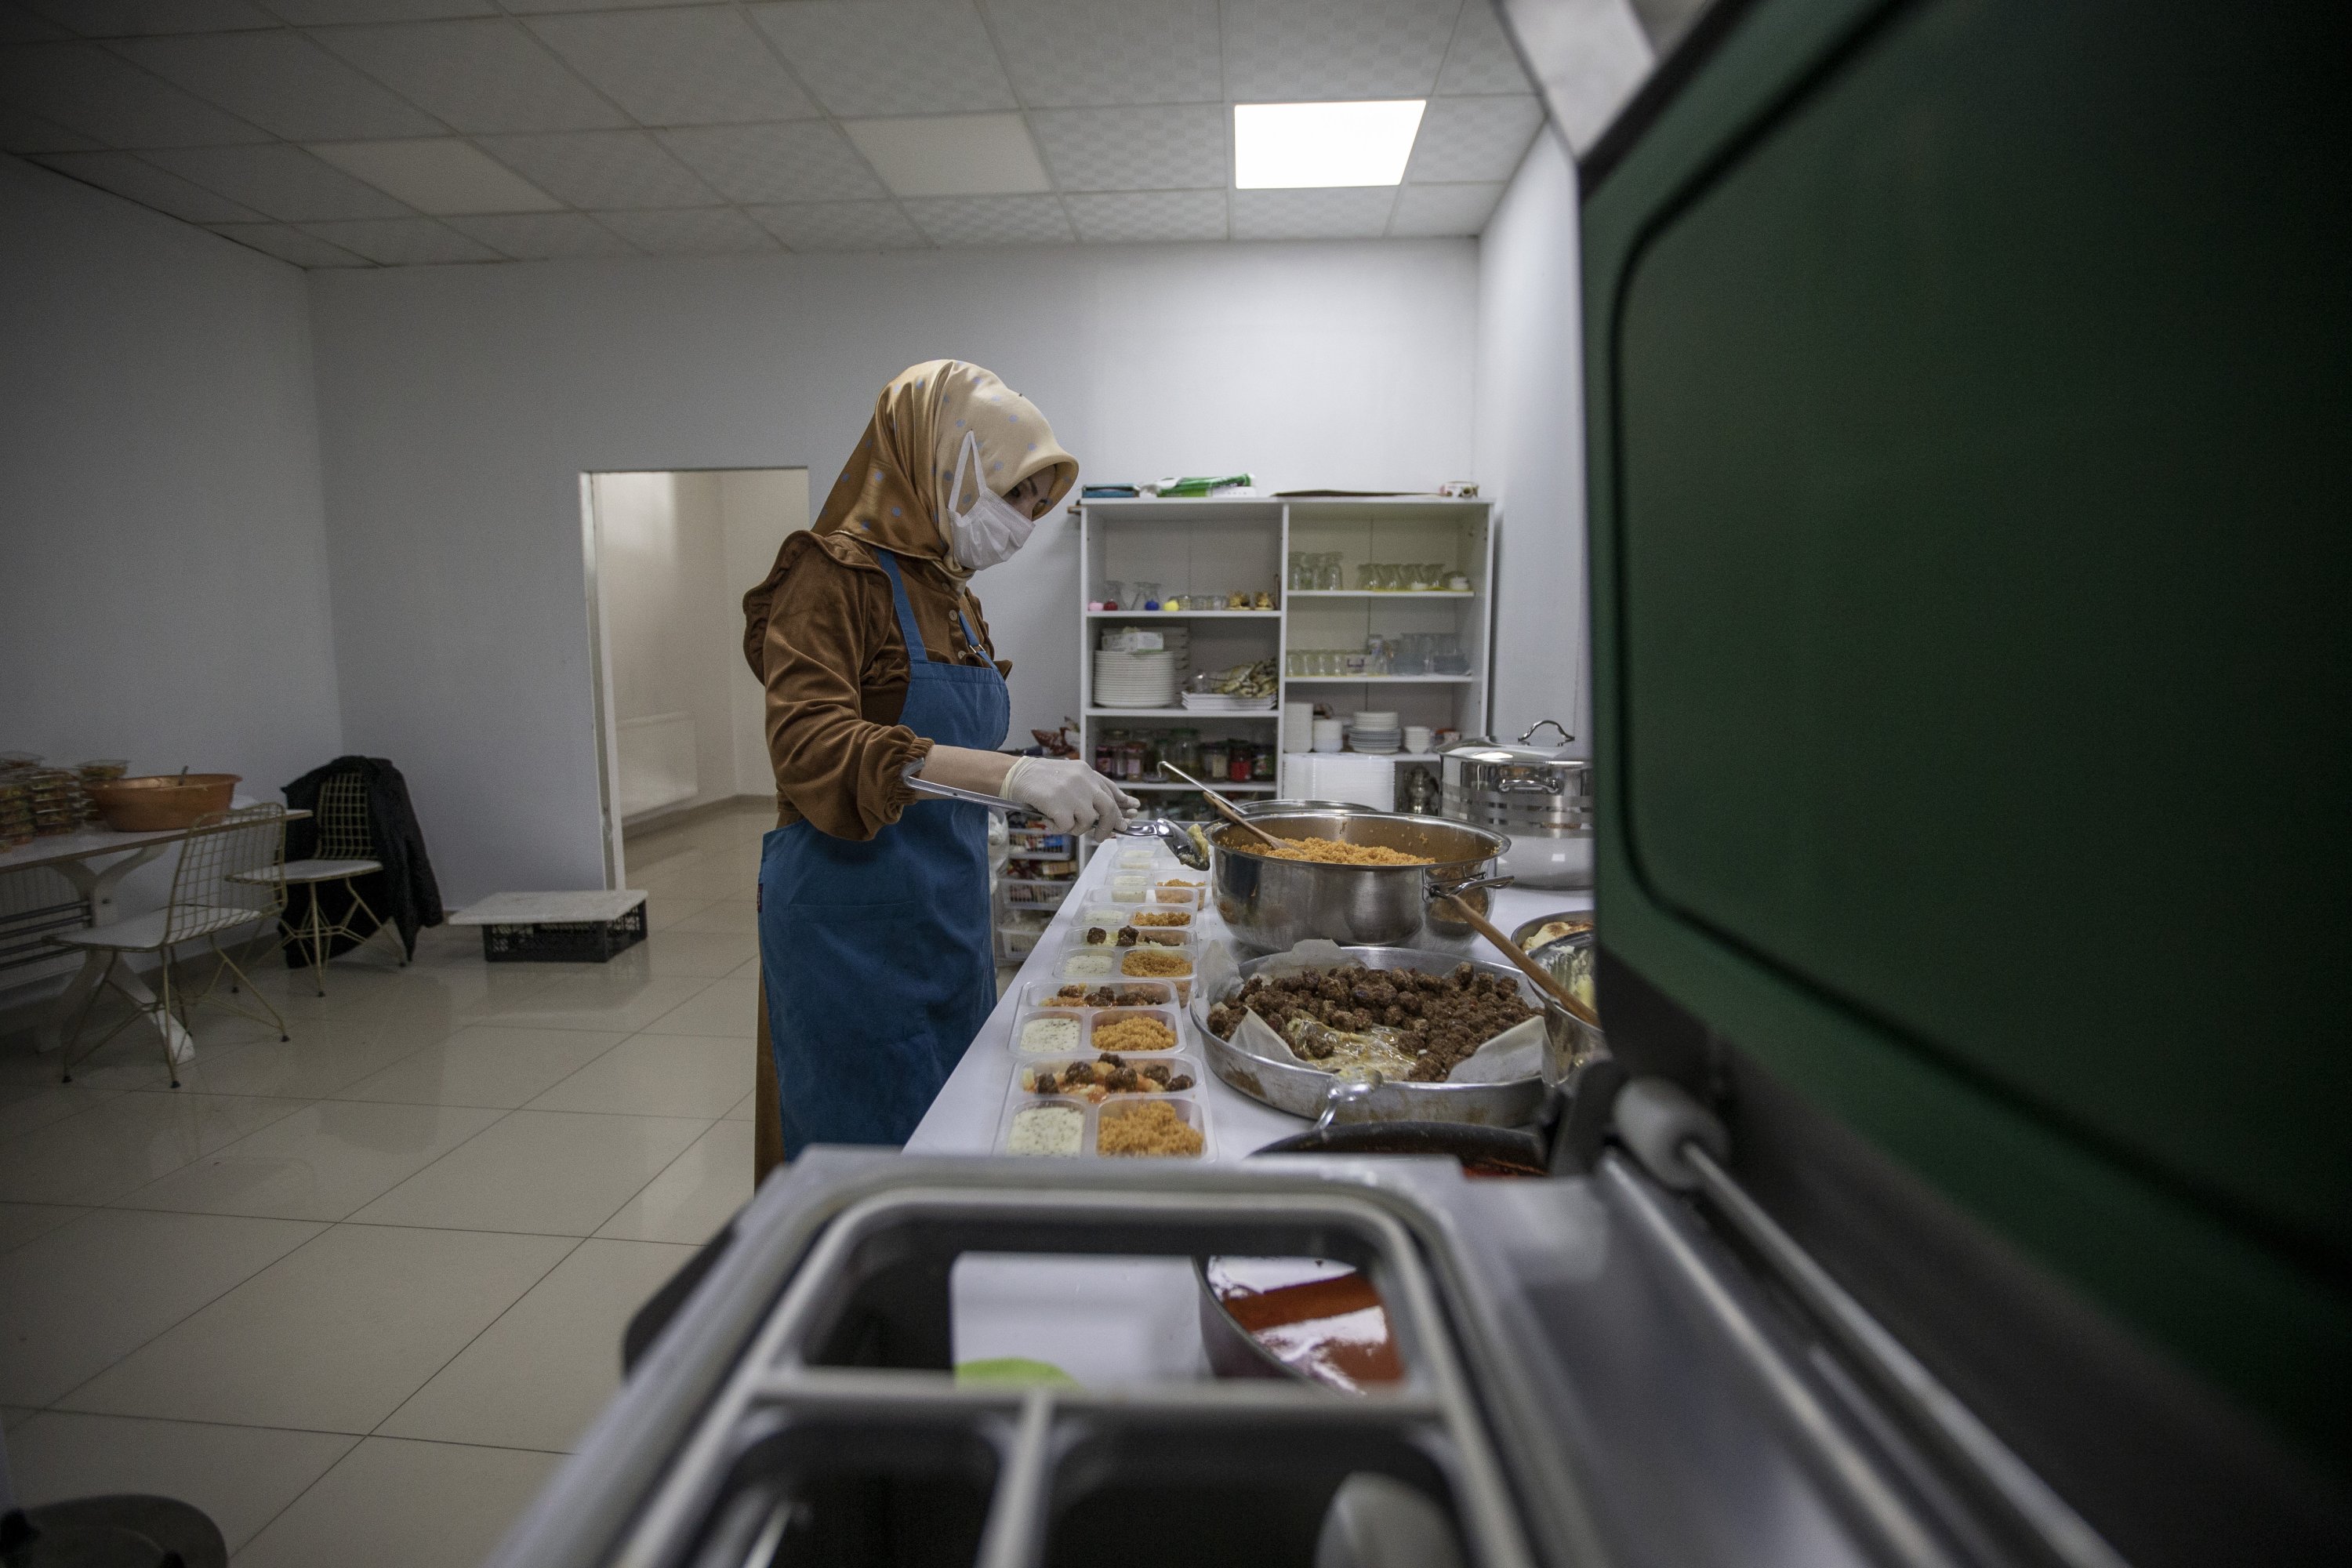 The kitchen of the "Miss Mutfağım" catering, restaurant and cafeteria started by female entrepreneur Yasemin Bülbül in Erzurum, eastern Turkey, Dec. 9, 2021. (AA Photo)